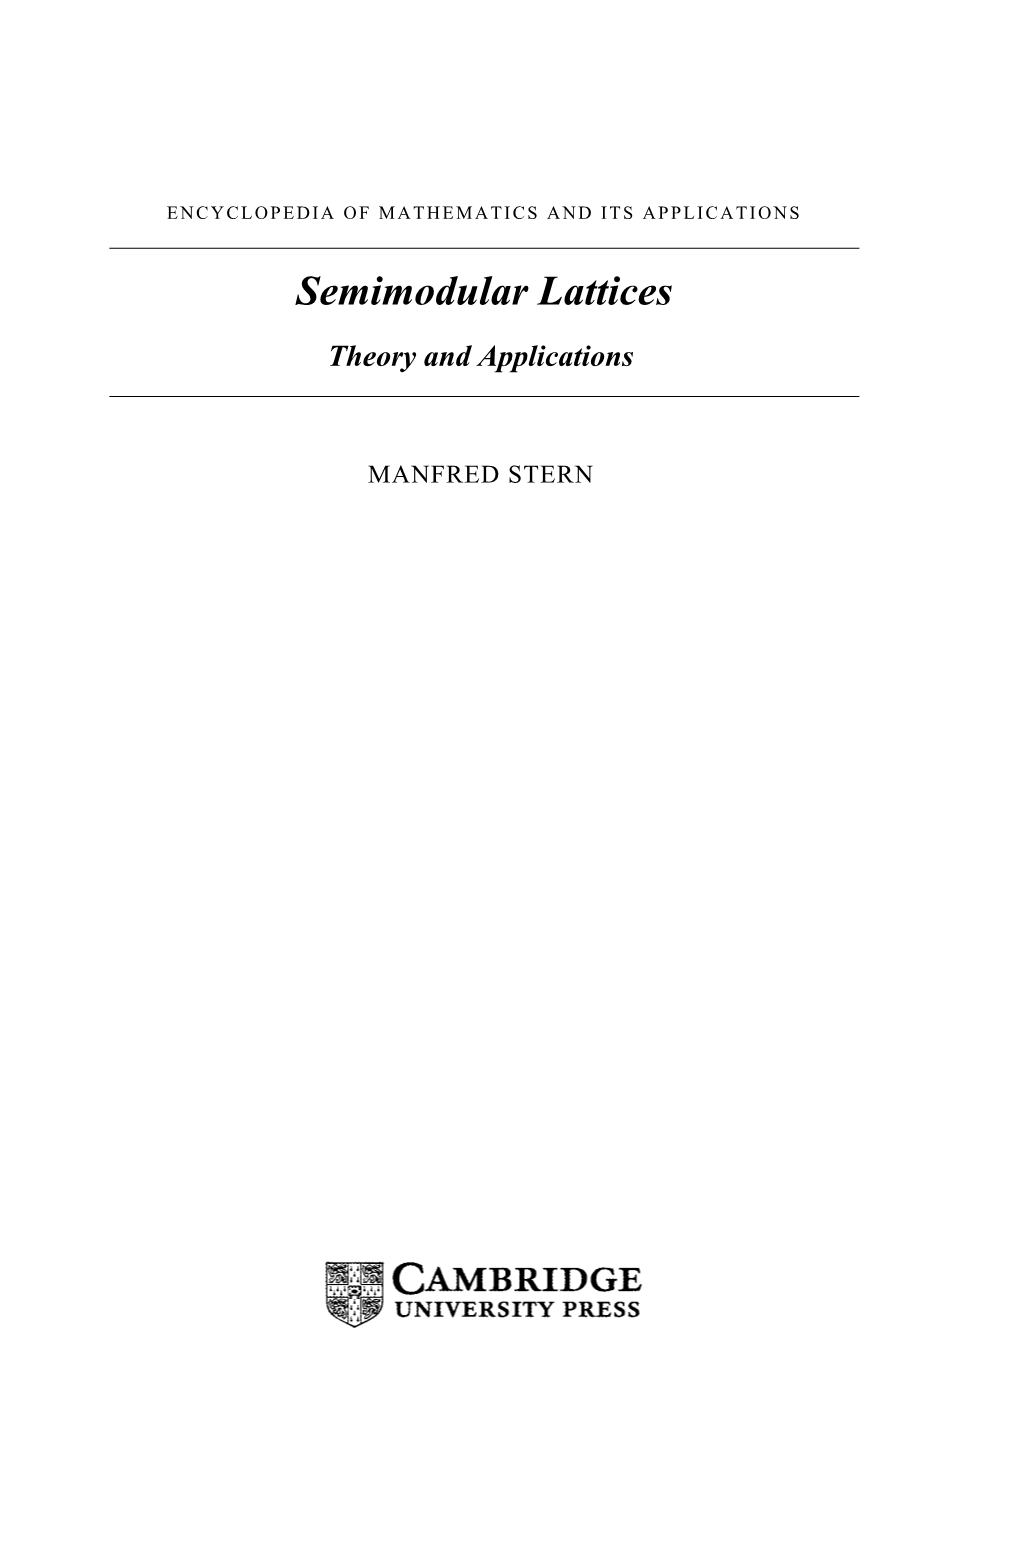 Semimodular Lattices Theory and Applications